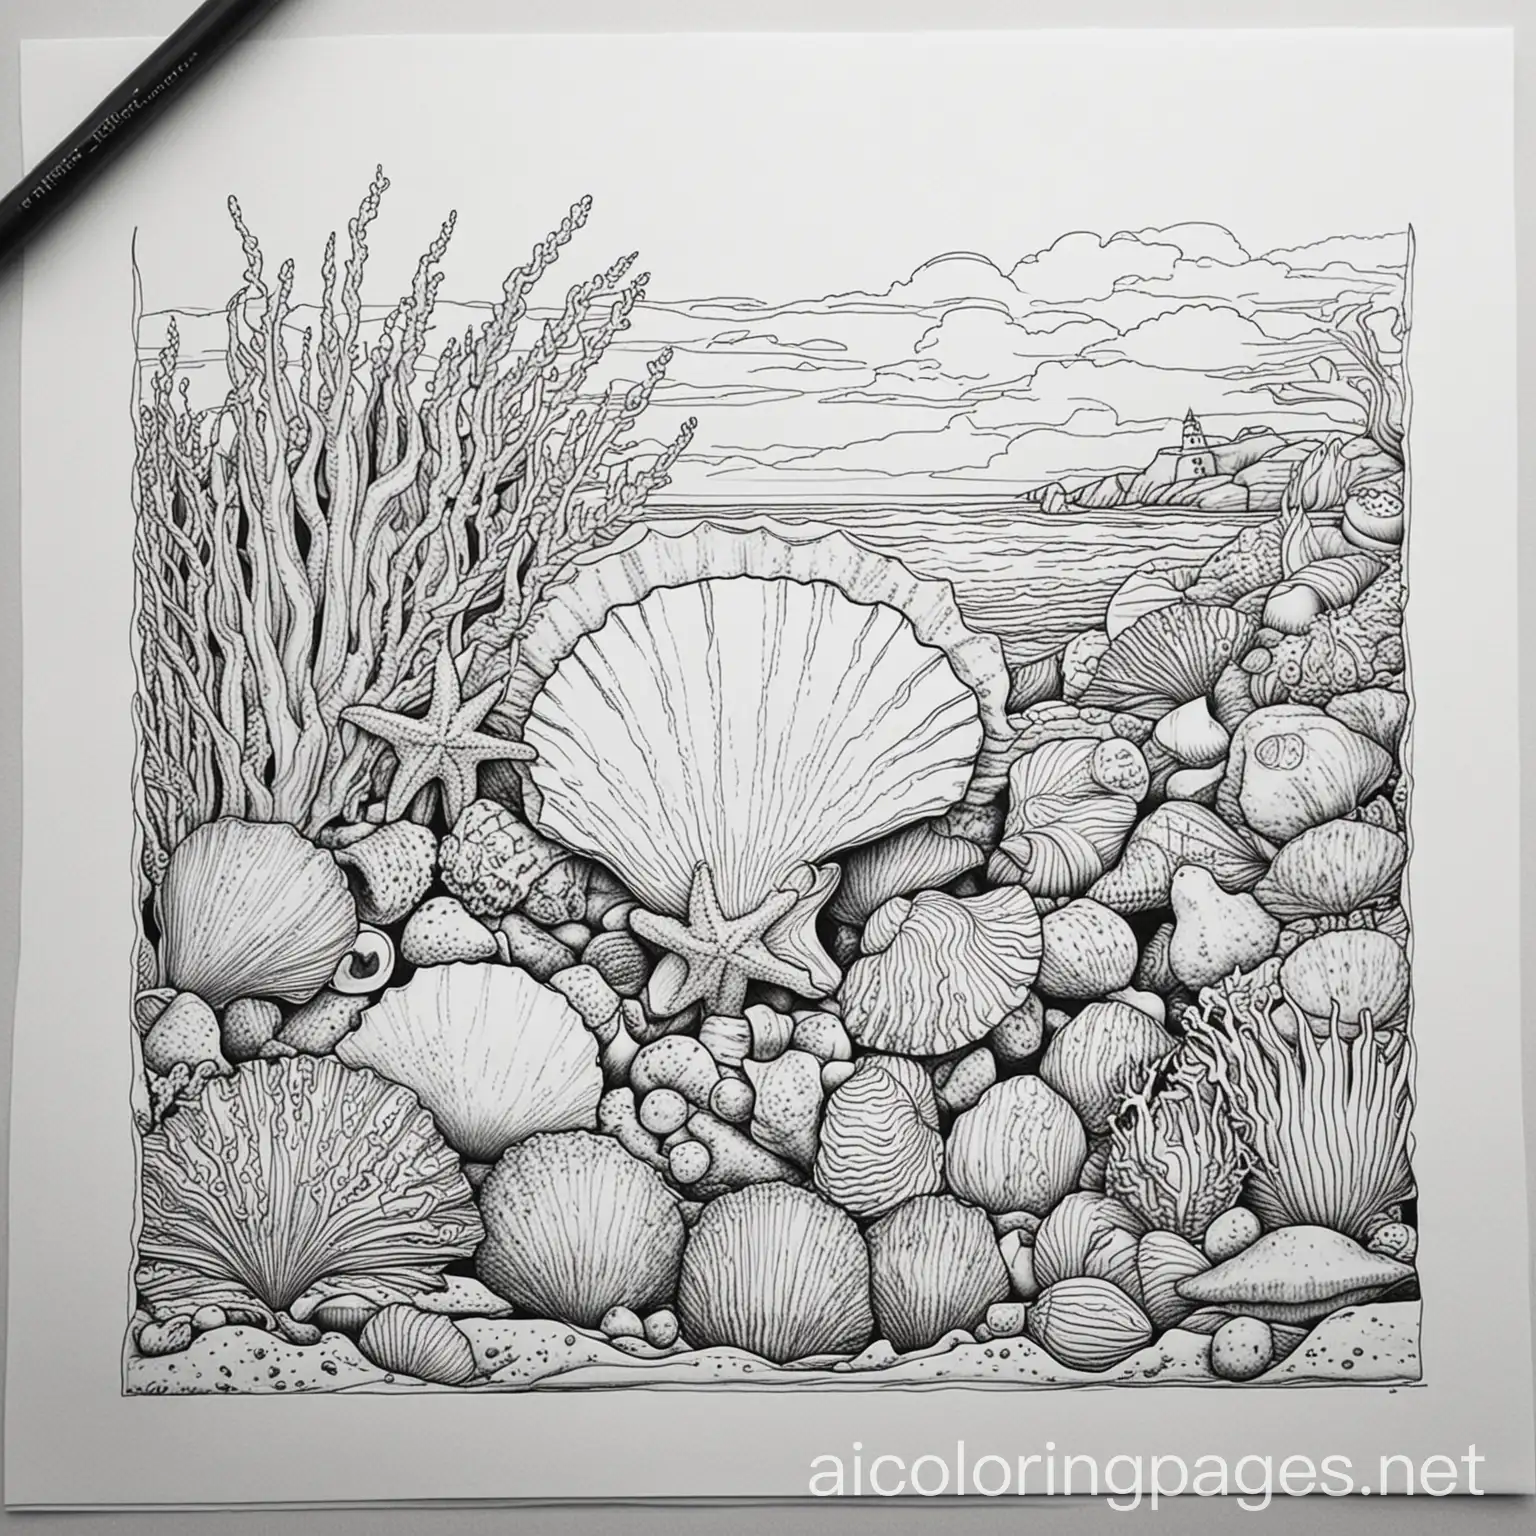 Make a coloring page with bold black and white outlines of seashells on a oceanic scene. , Coloring Page, black and white, line art, white background, Simplicity, Ample White Space. The background of the coloring page is plain white to make it easy for young children to color within the lines. The outlines of all the subjects are easy to distinguish, making it simple for kids to color without too much difficulty